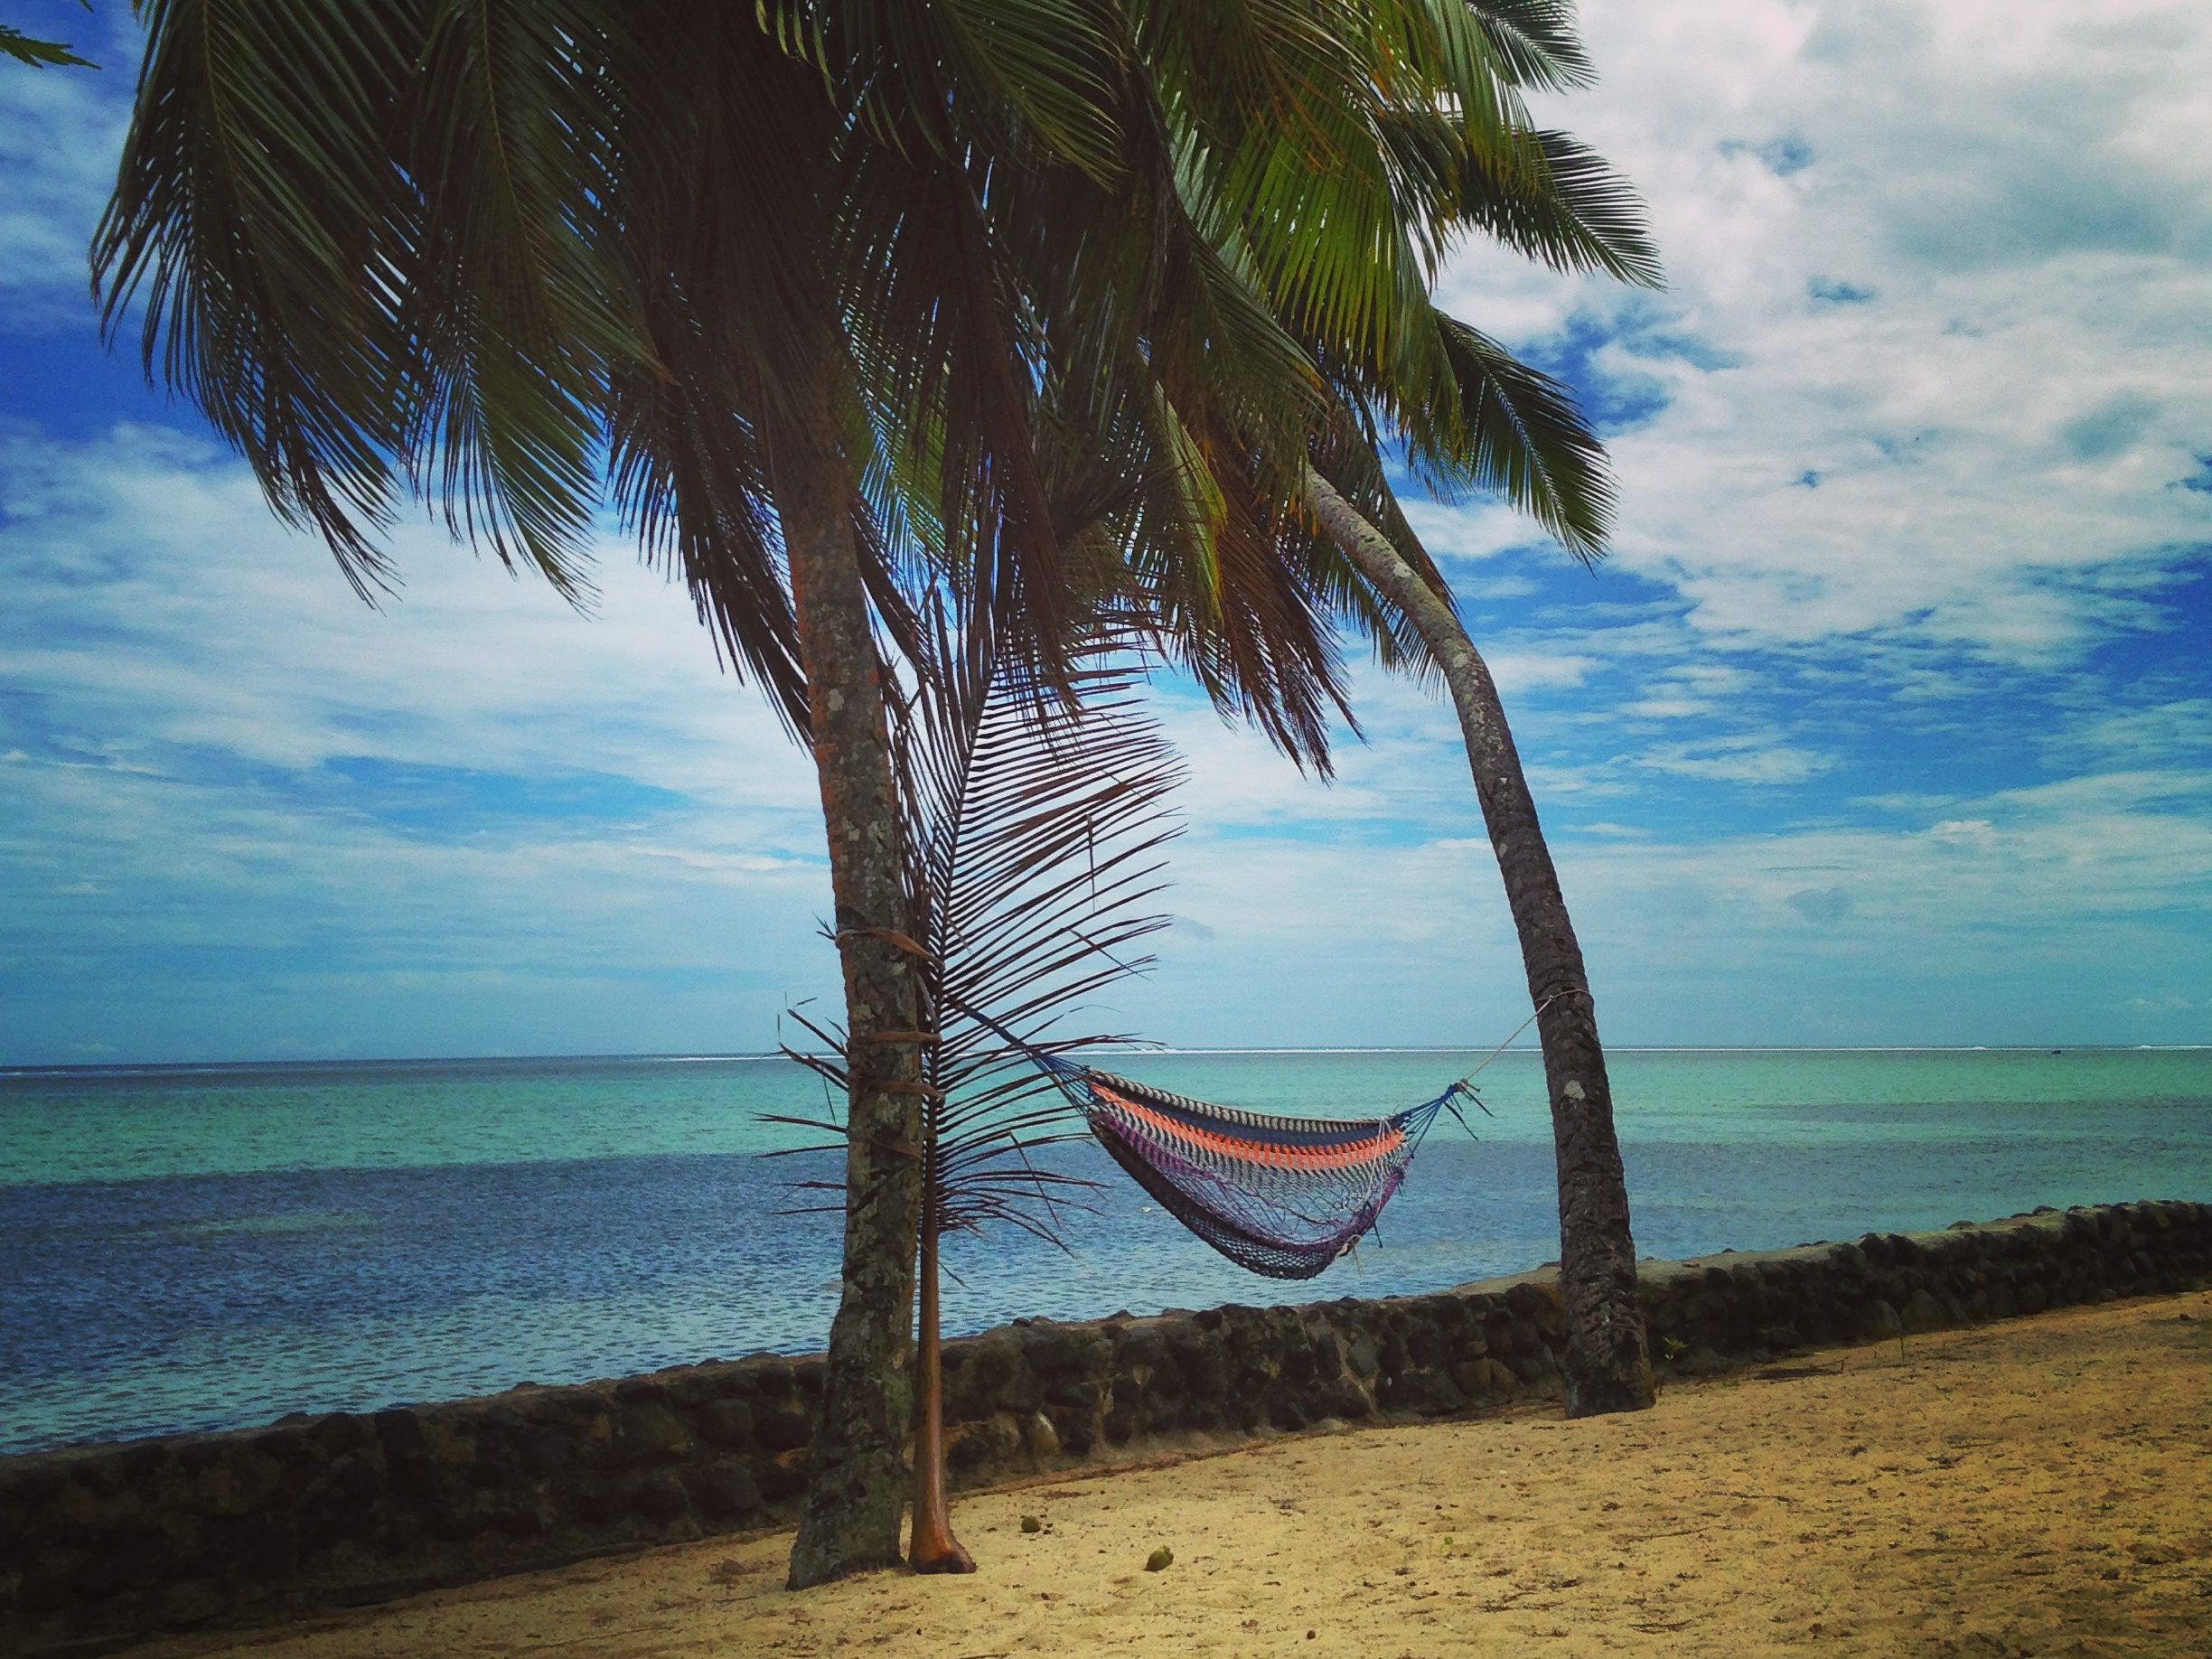 Hammock hanging between two trees on the beach